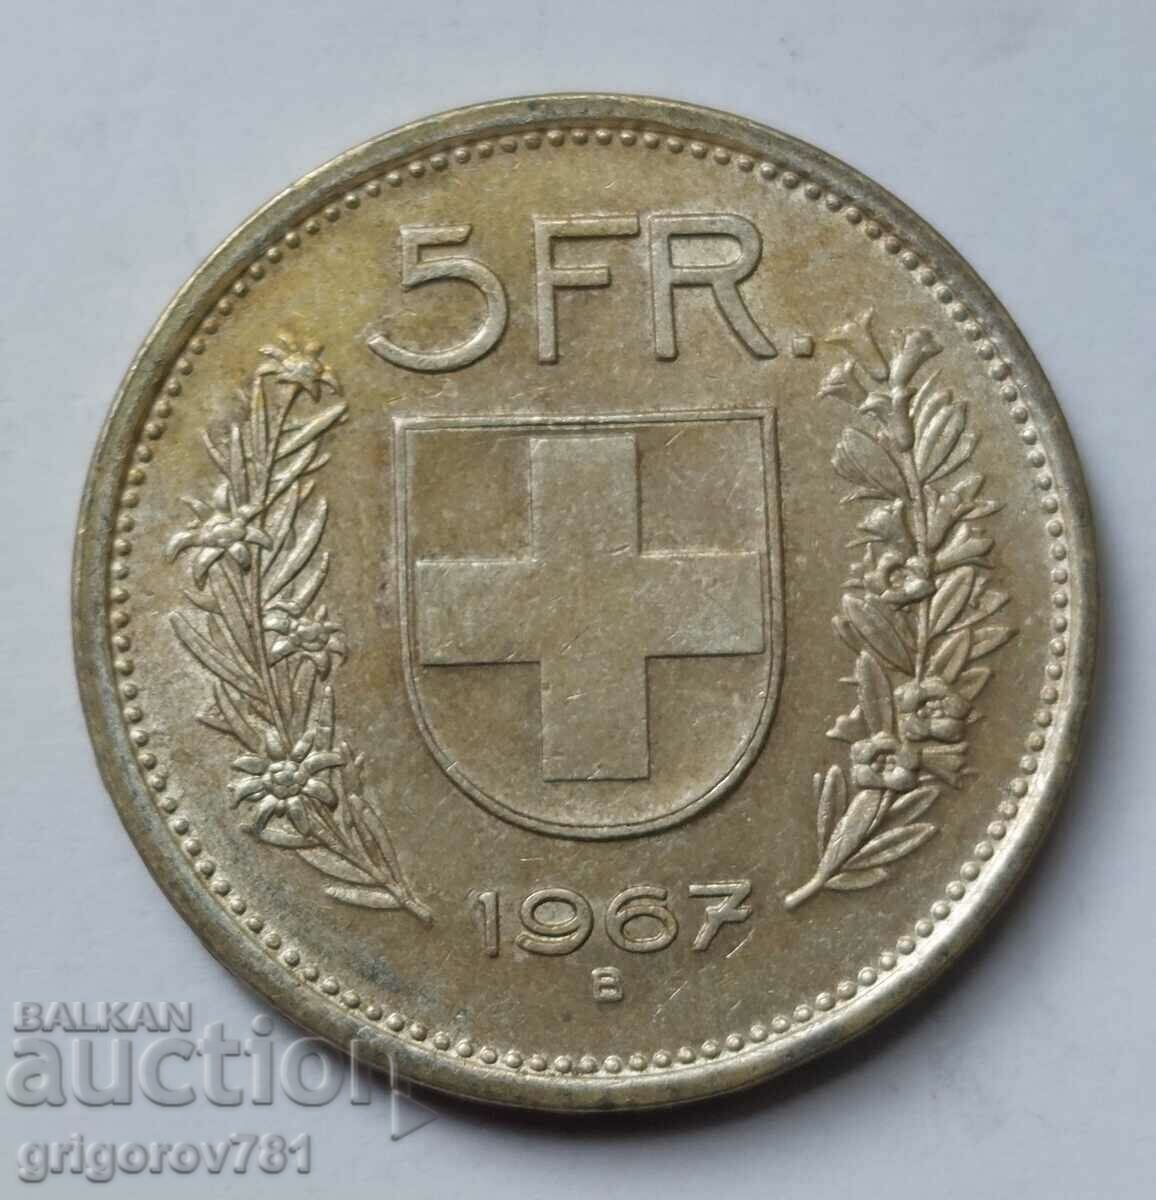 5 Francs Silver Switzerland 1967 B - Silver Coin #18